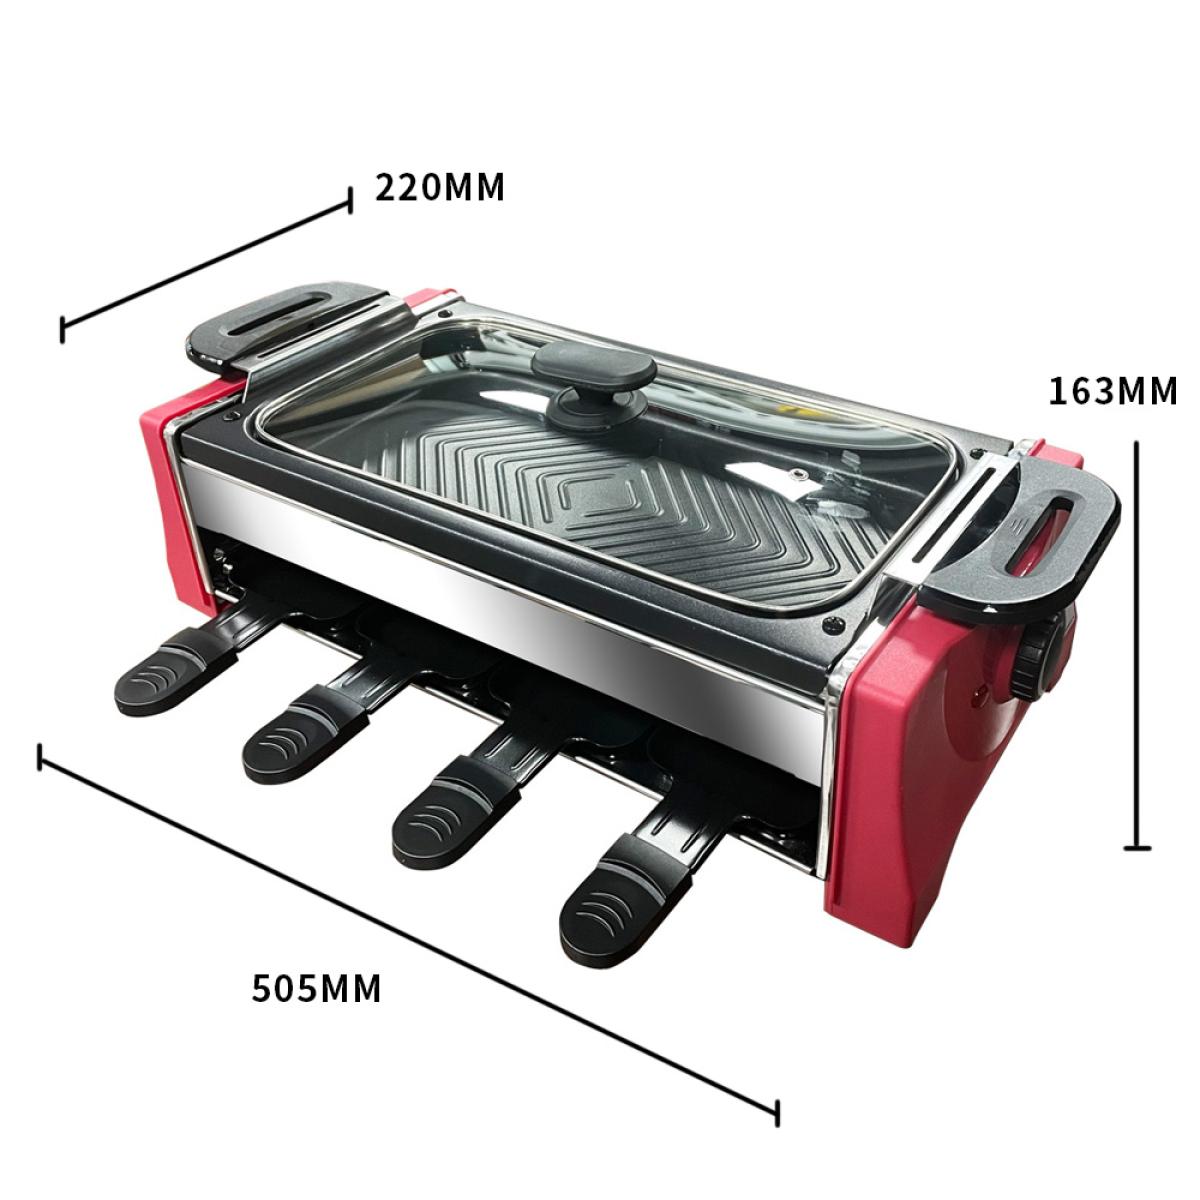 Raclette Grill 8-person baking tray with lid non stick coating, deeper baking tray with 8 mini baking trays Raclette, stepless temperature control, 1300w